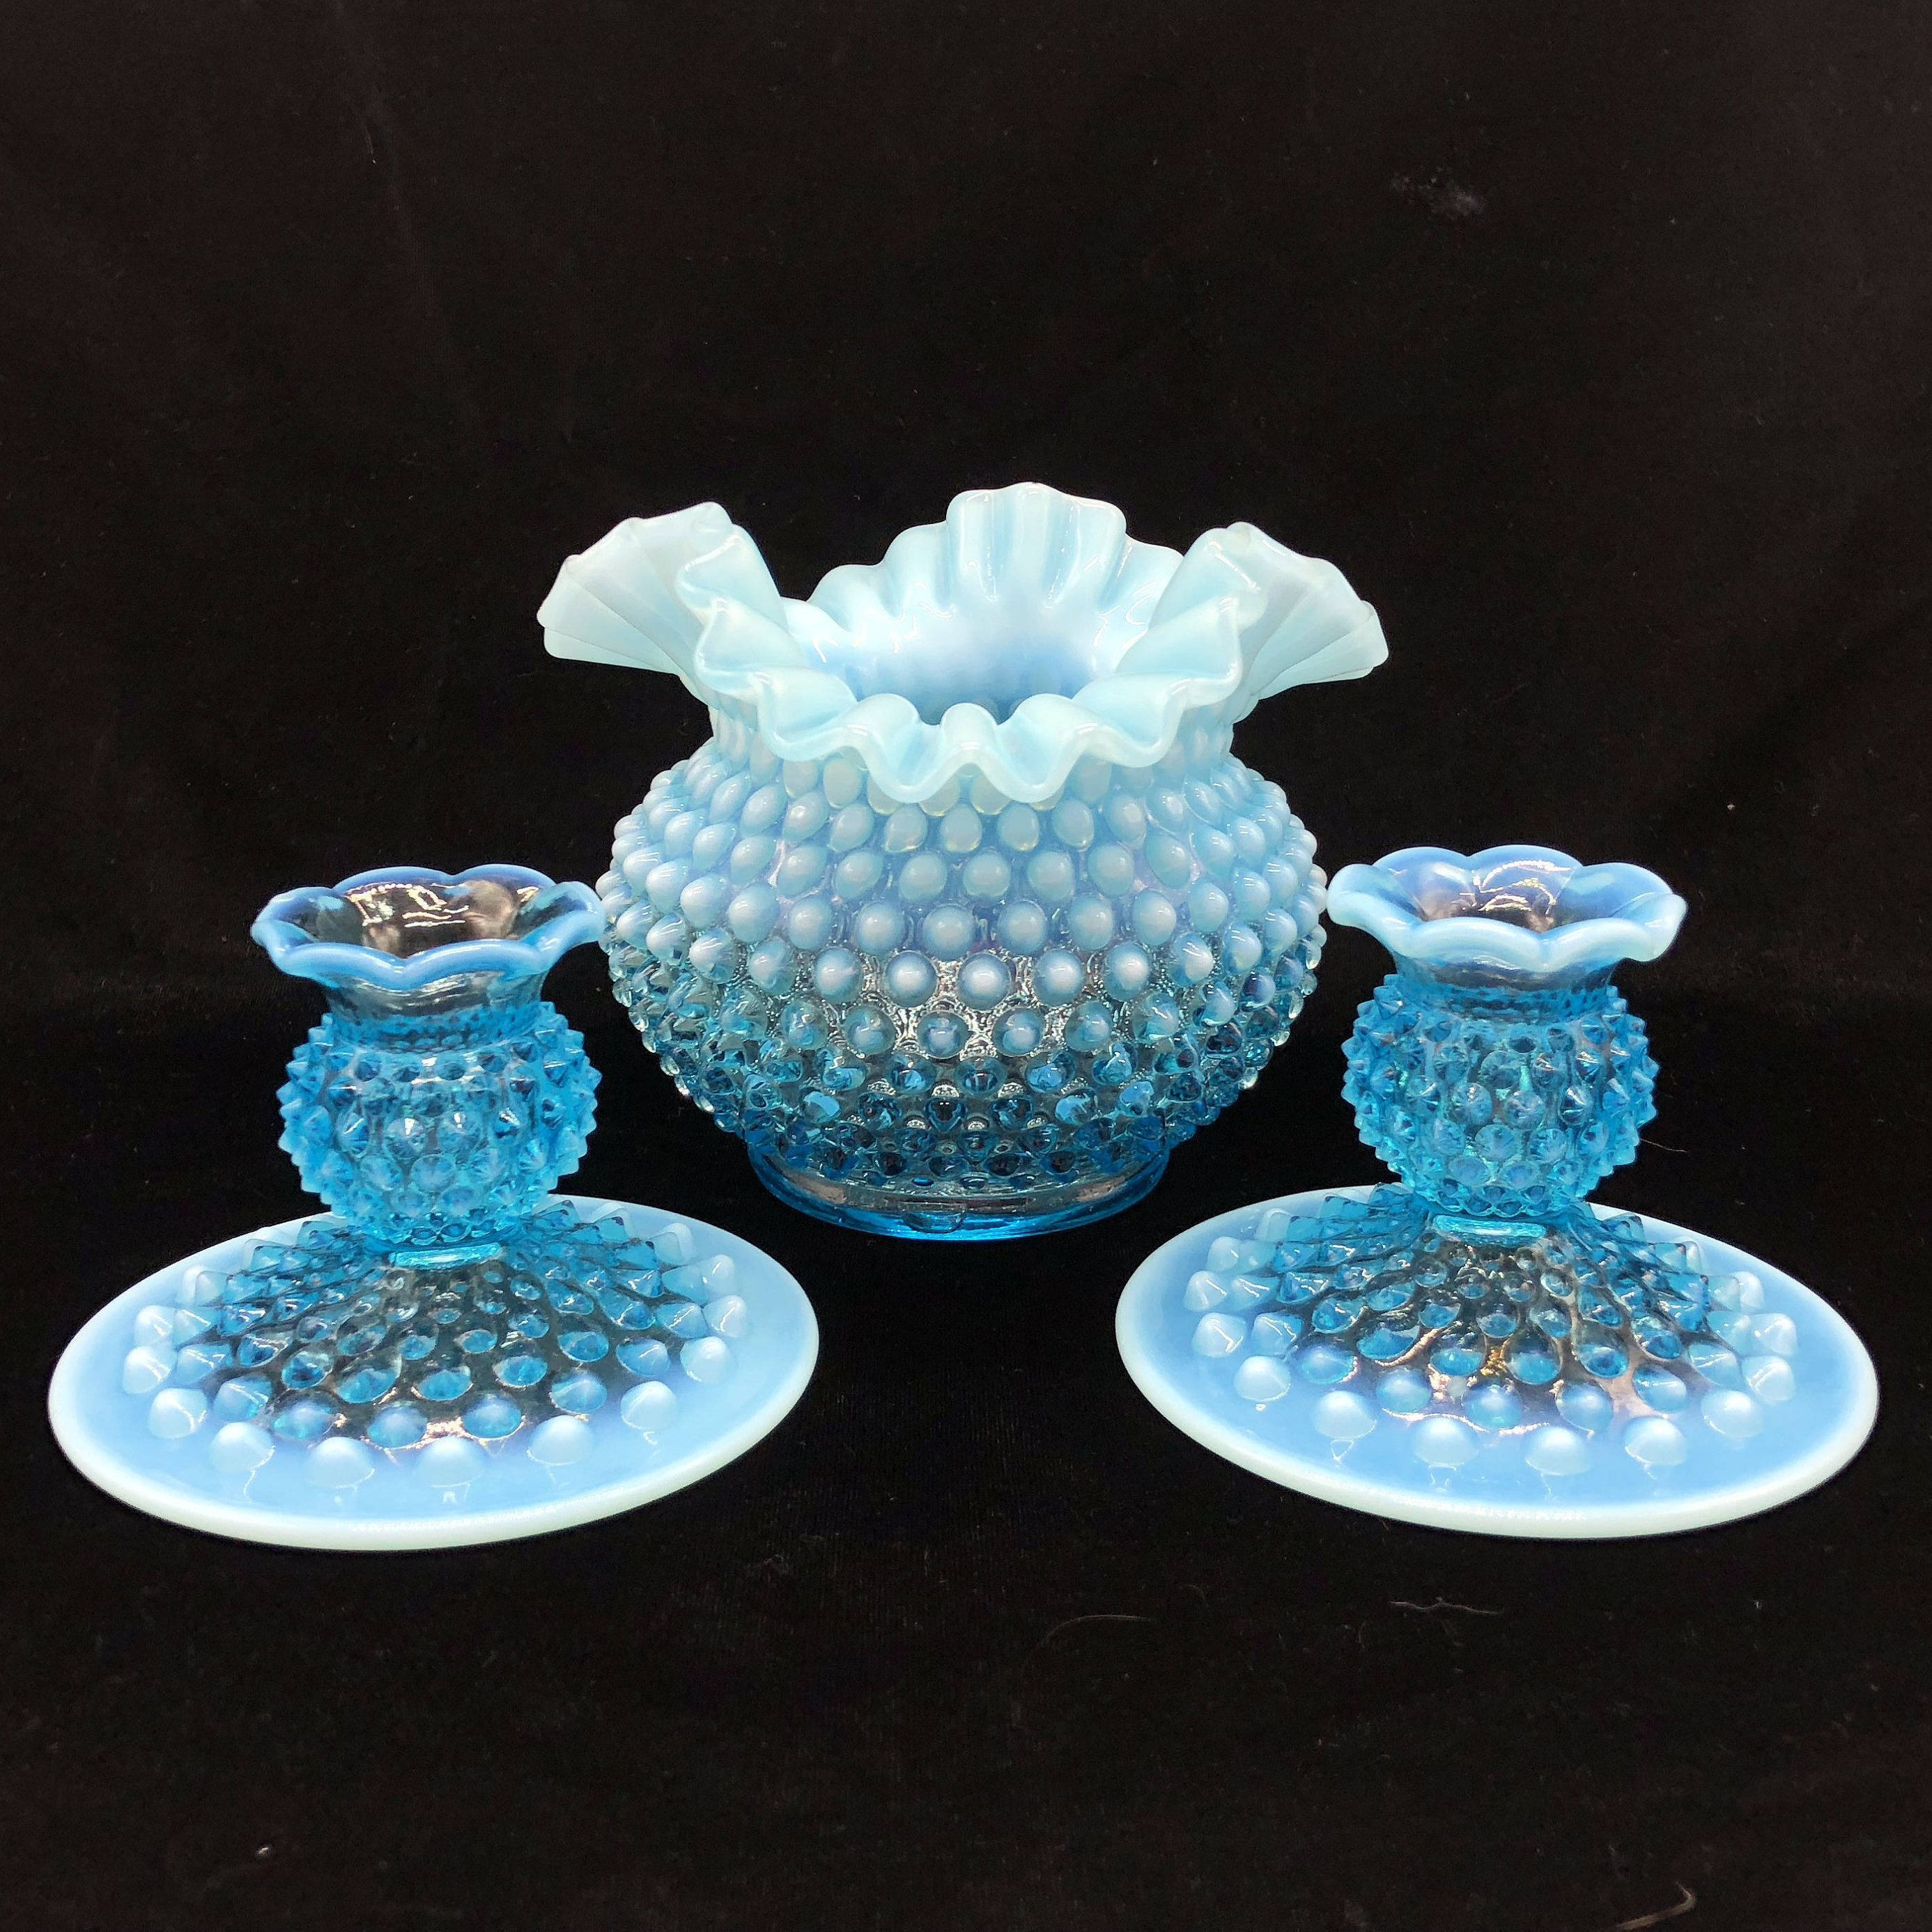 25 Recommended Tiffany Blue Vase 2024 free download tiffany blue vase of 37 fenton blue glass vase the weekly world with regard to fenton hobnail glass centerpiece set blue opalescent vase candle